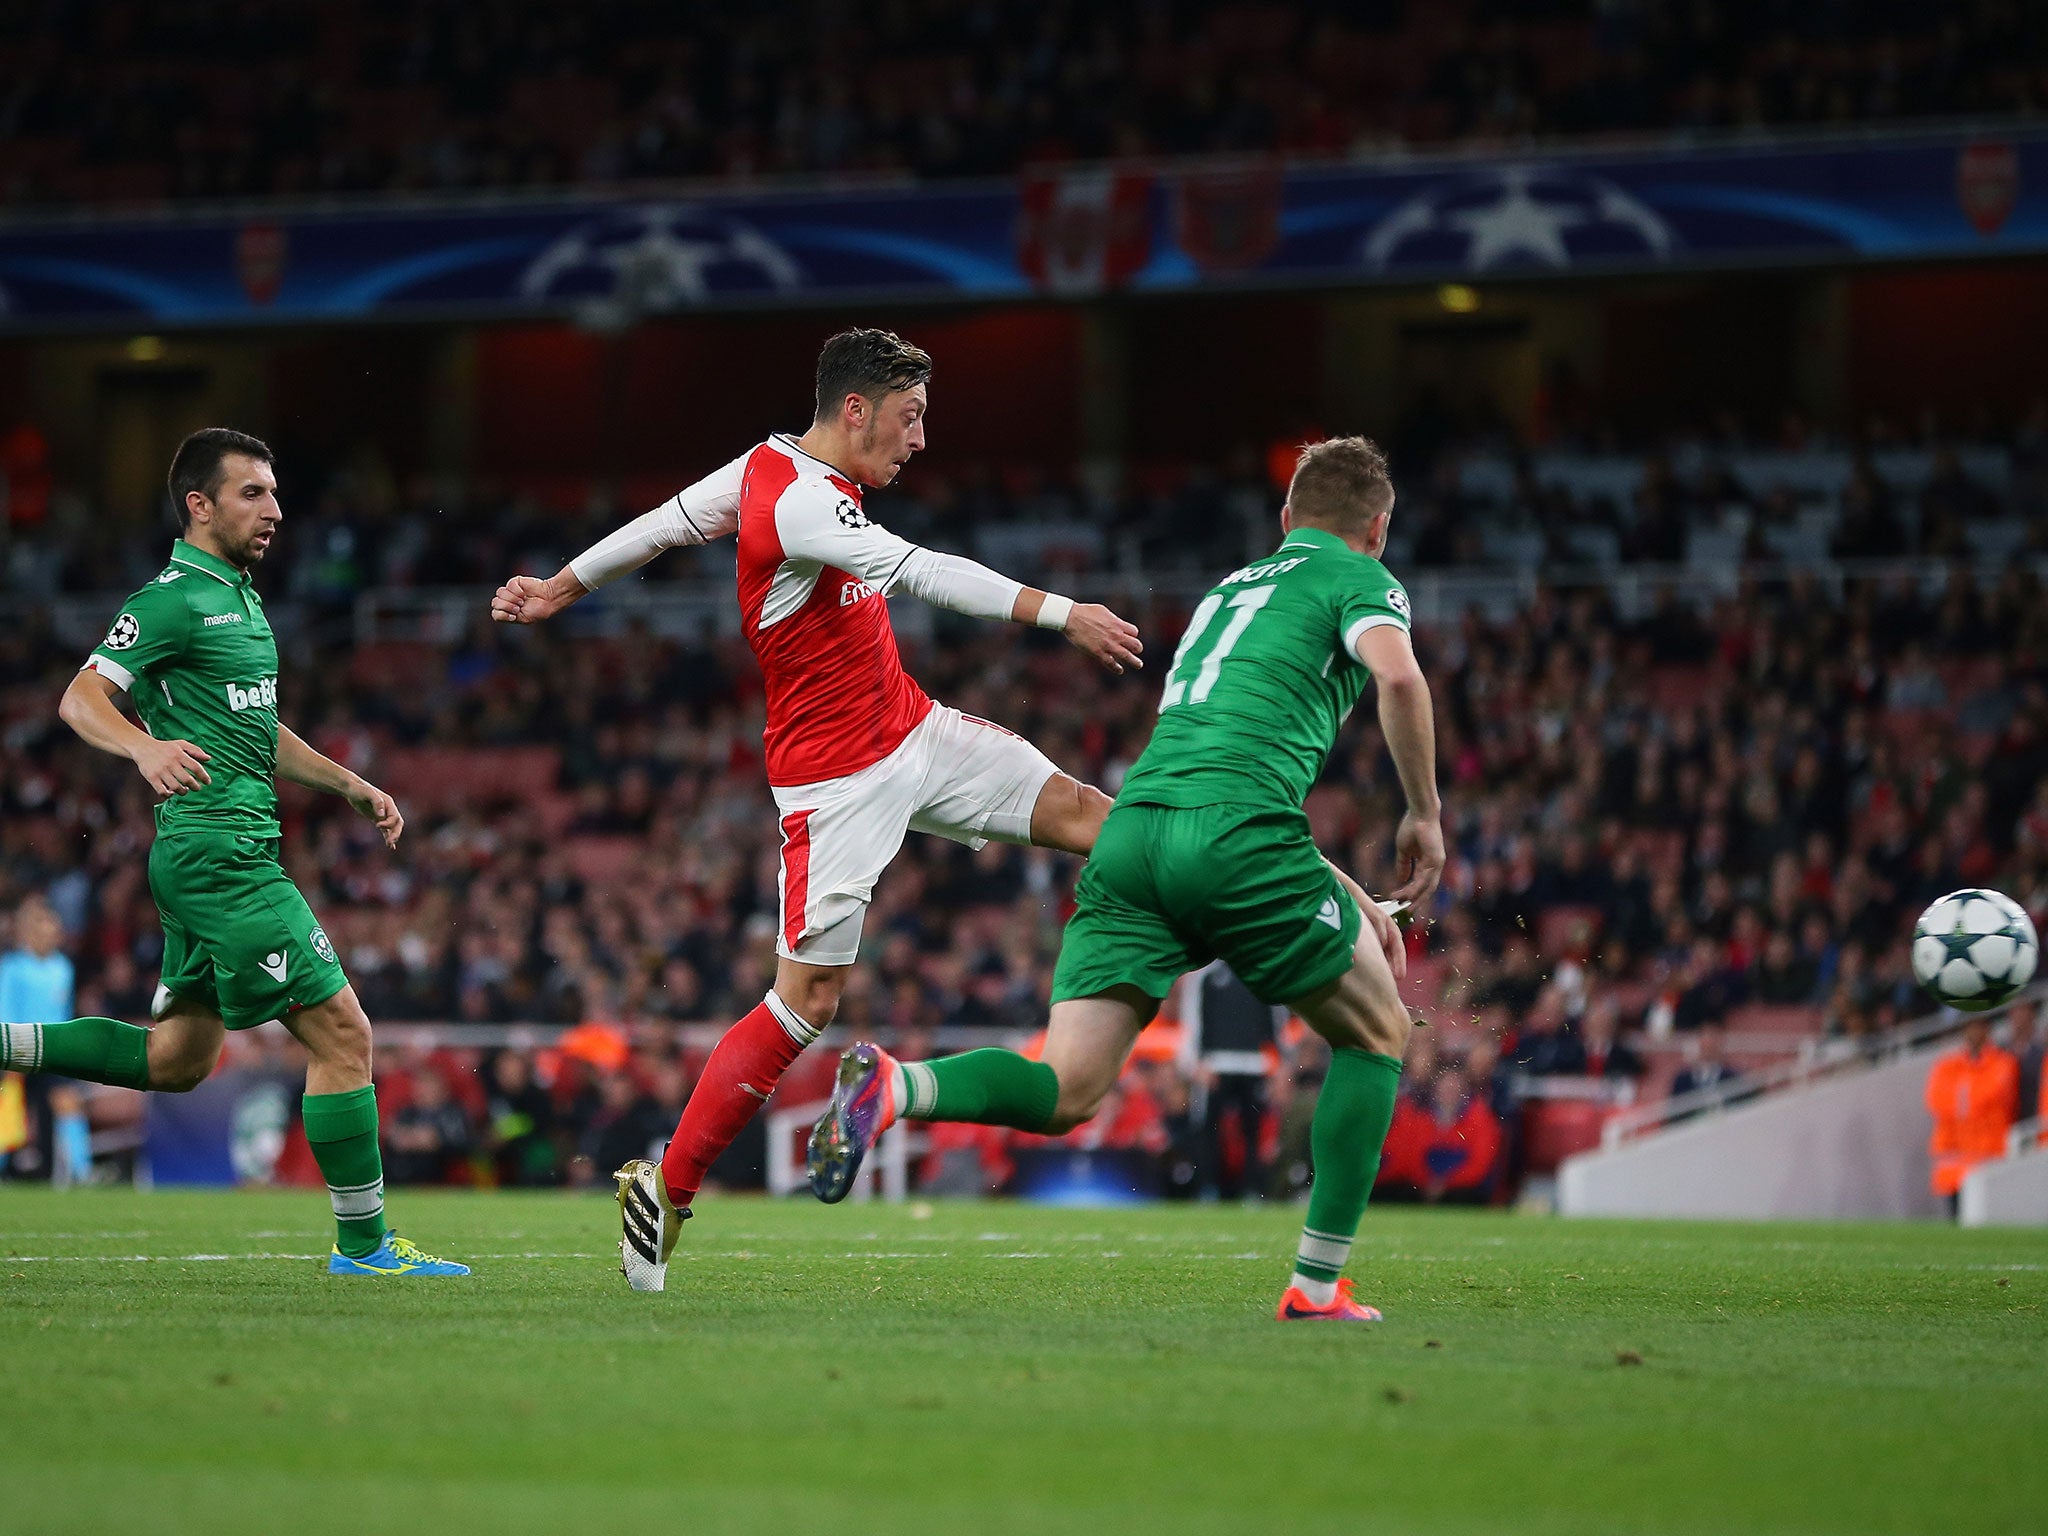 Mesut Ozil volleys home his third goal at The Emirates